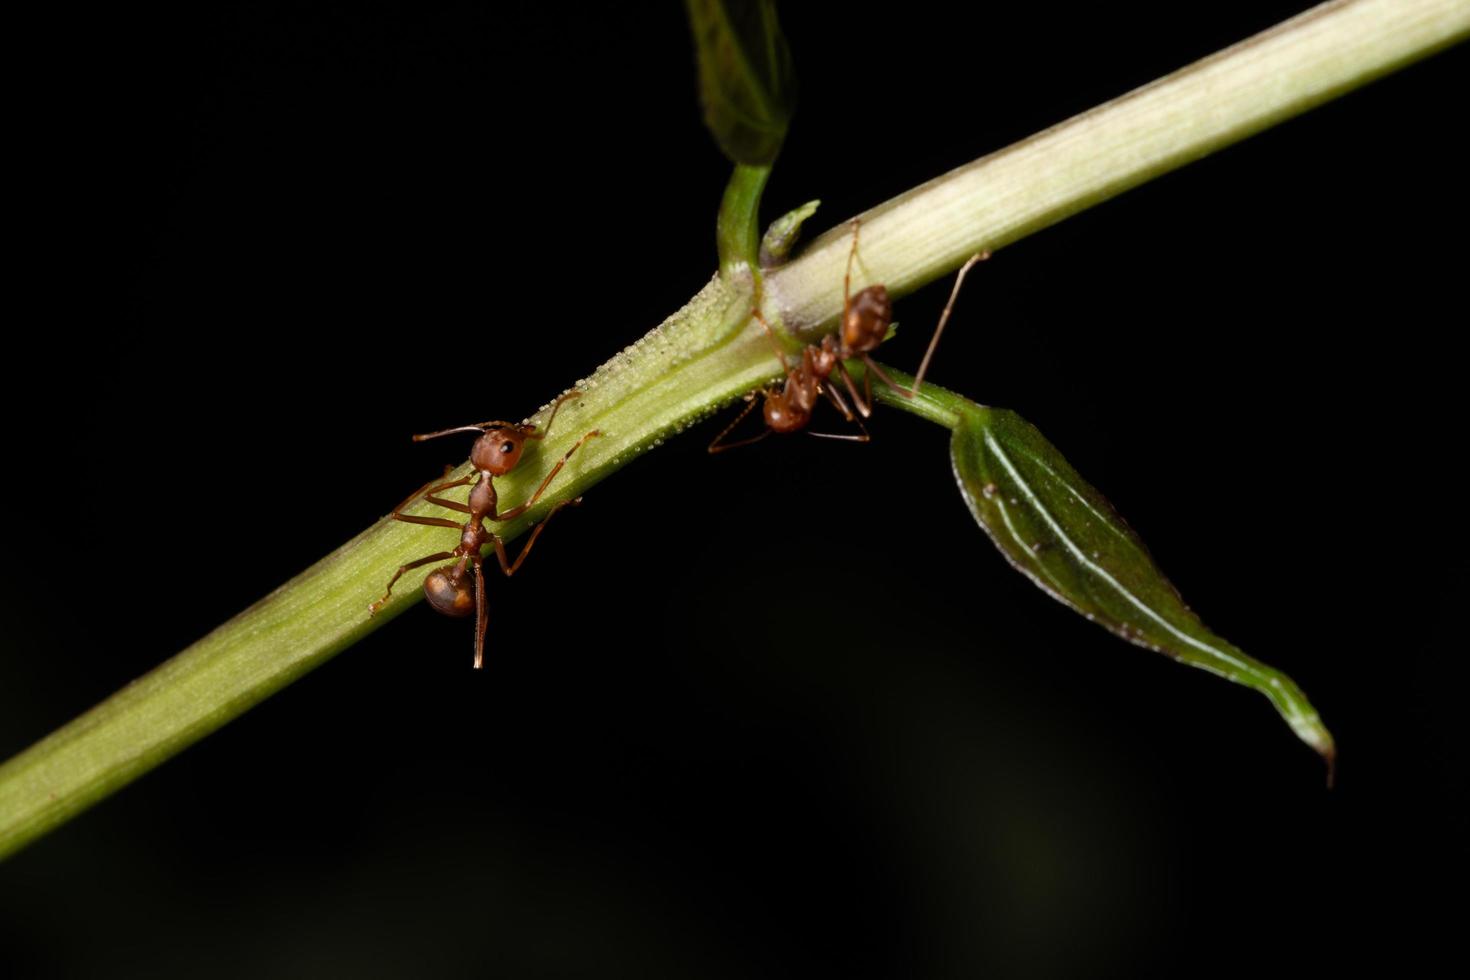 Ants on a branch photo